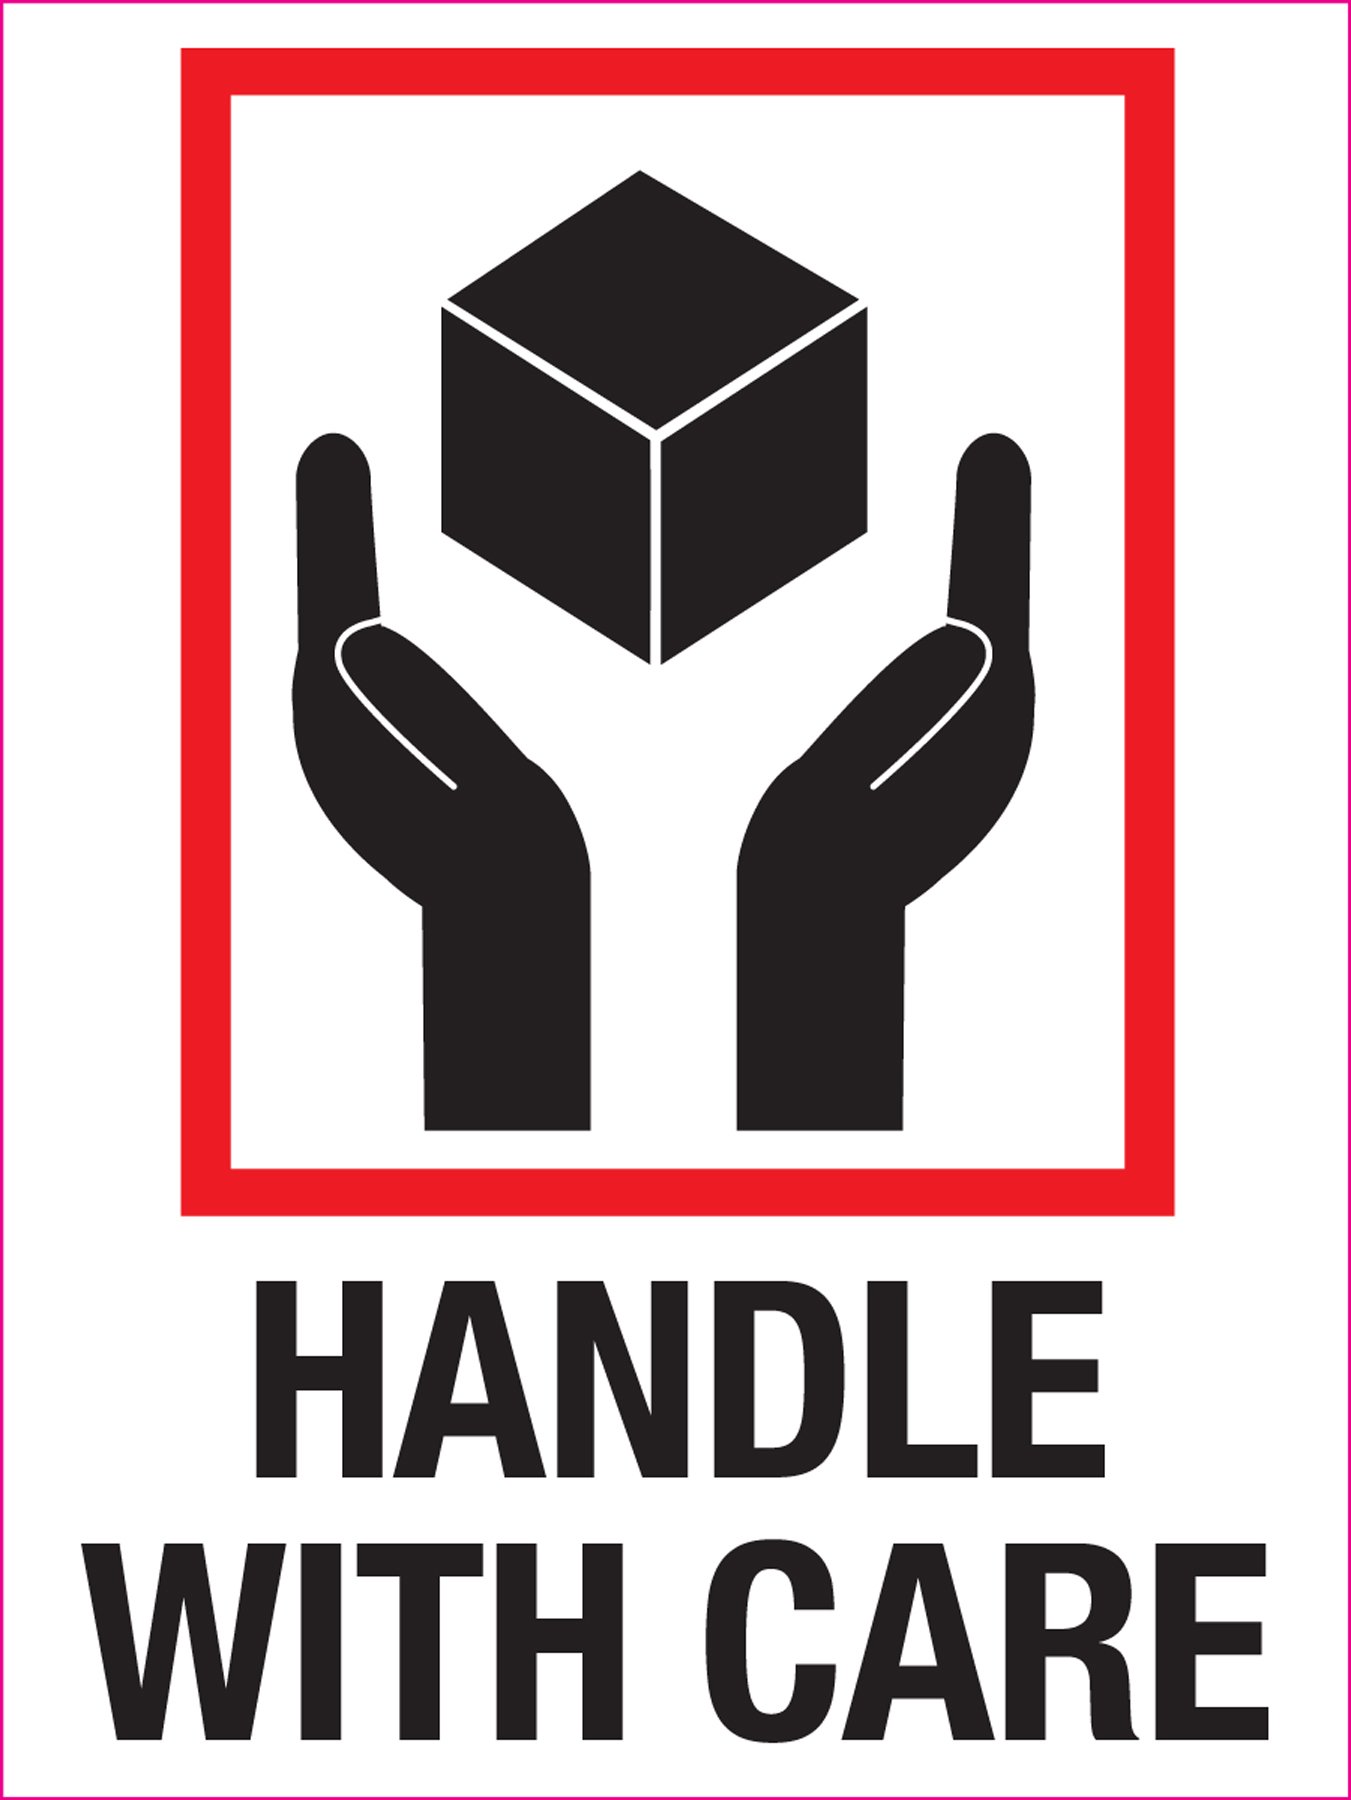 Handling time. Handle with Care. Handle with Care игра. Handle with Care группа. Костюм Handle with Care.